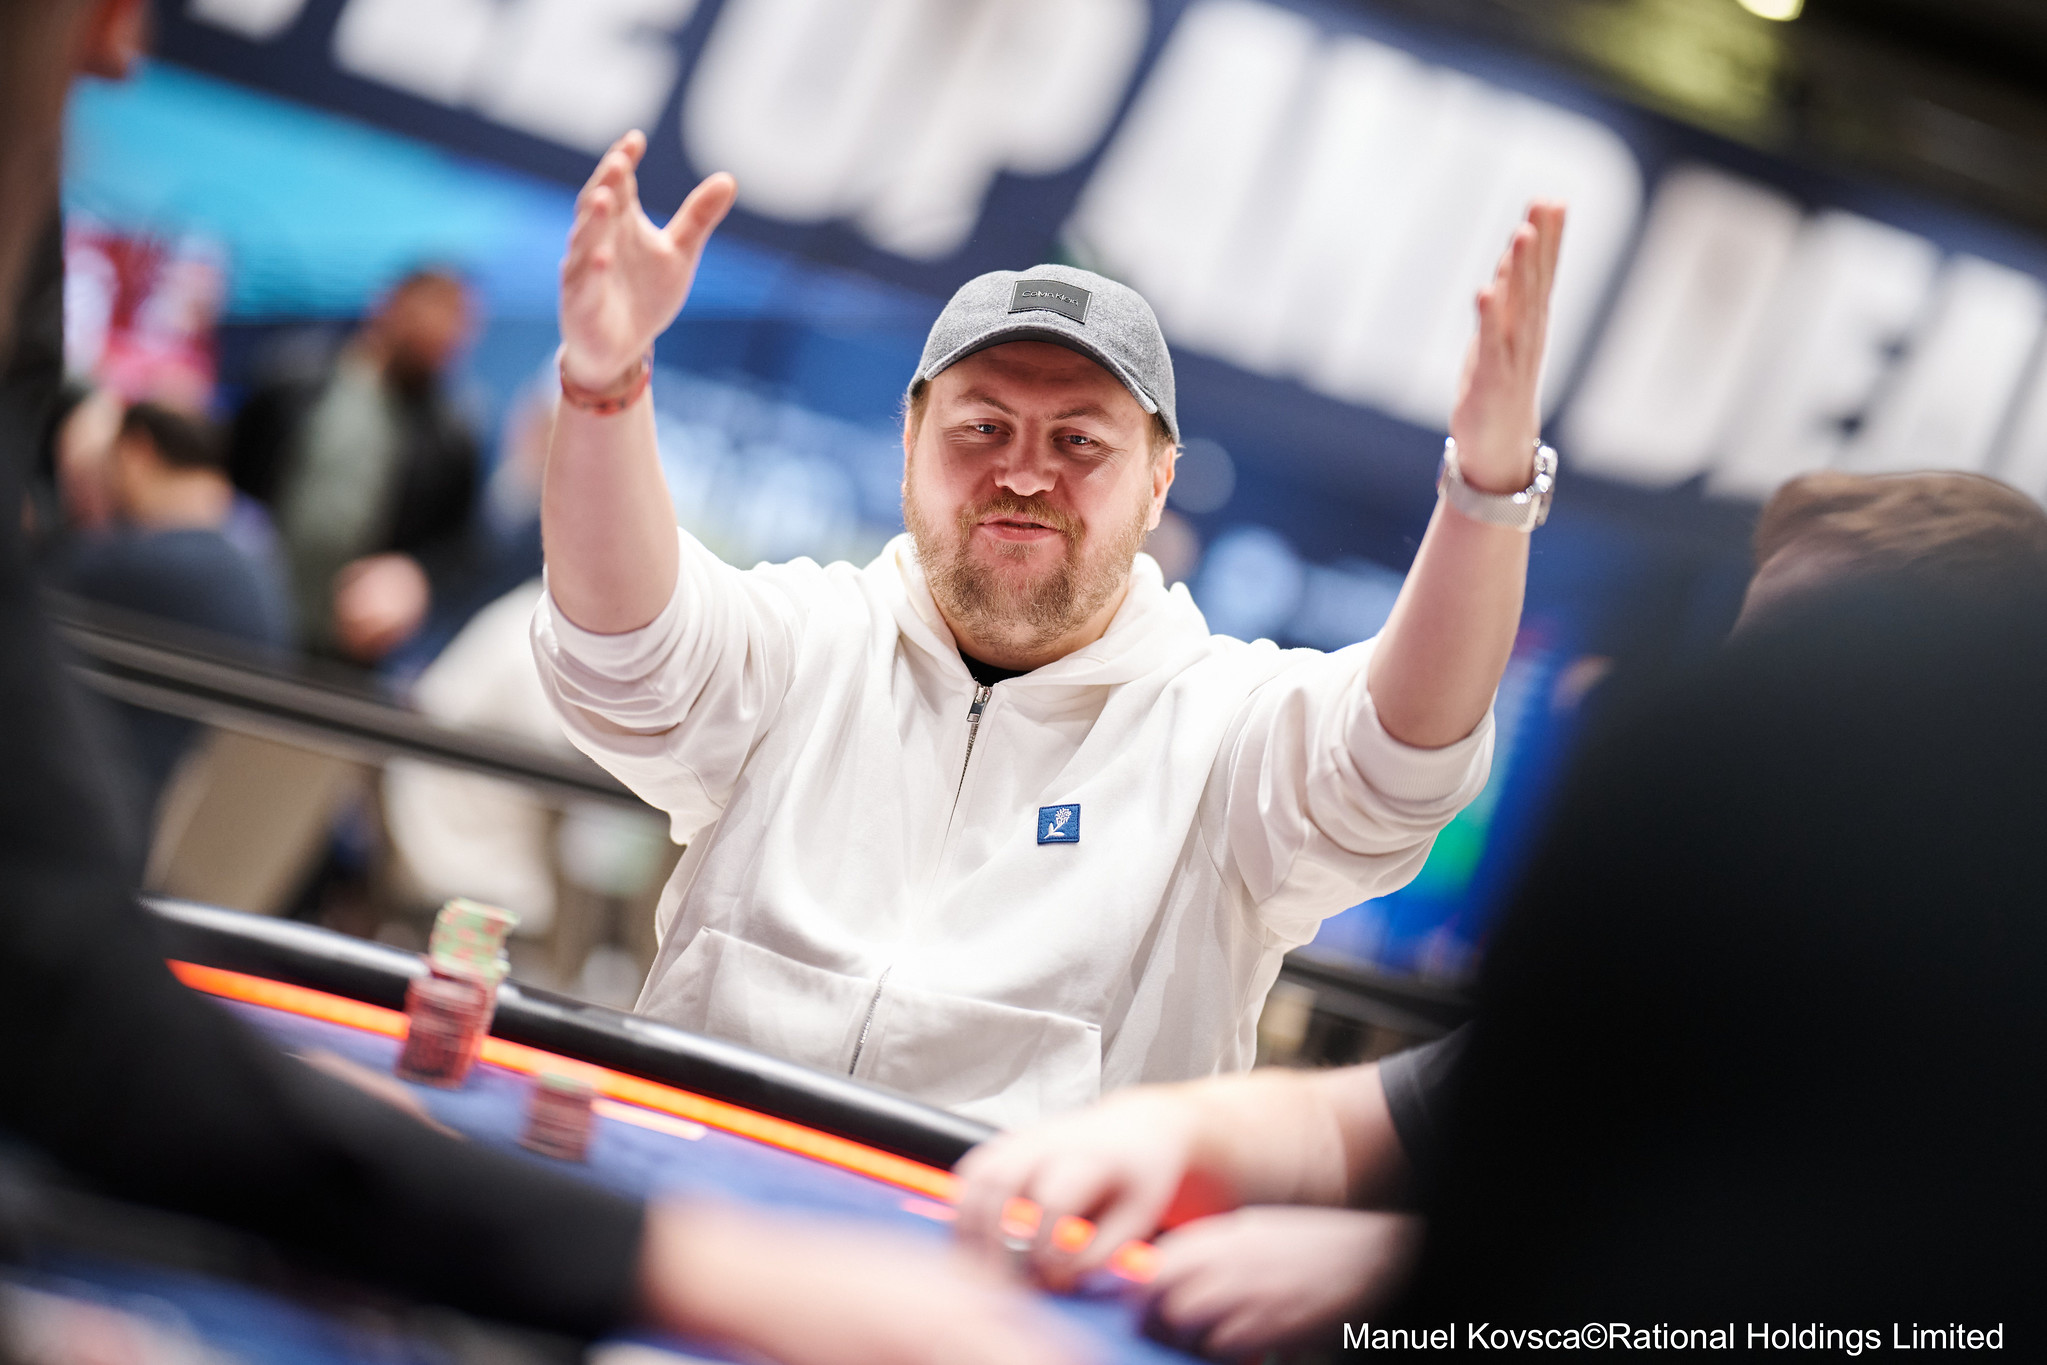 EPT: The unstoppable Jon Kyte is clearly heading for the championship! 